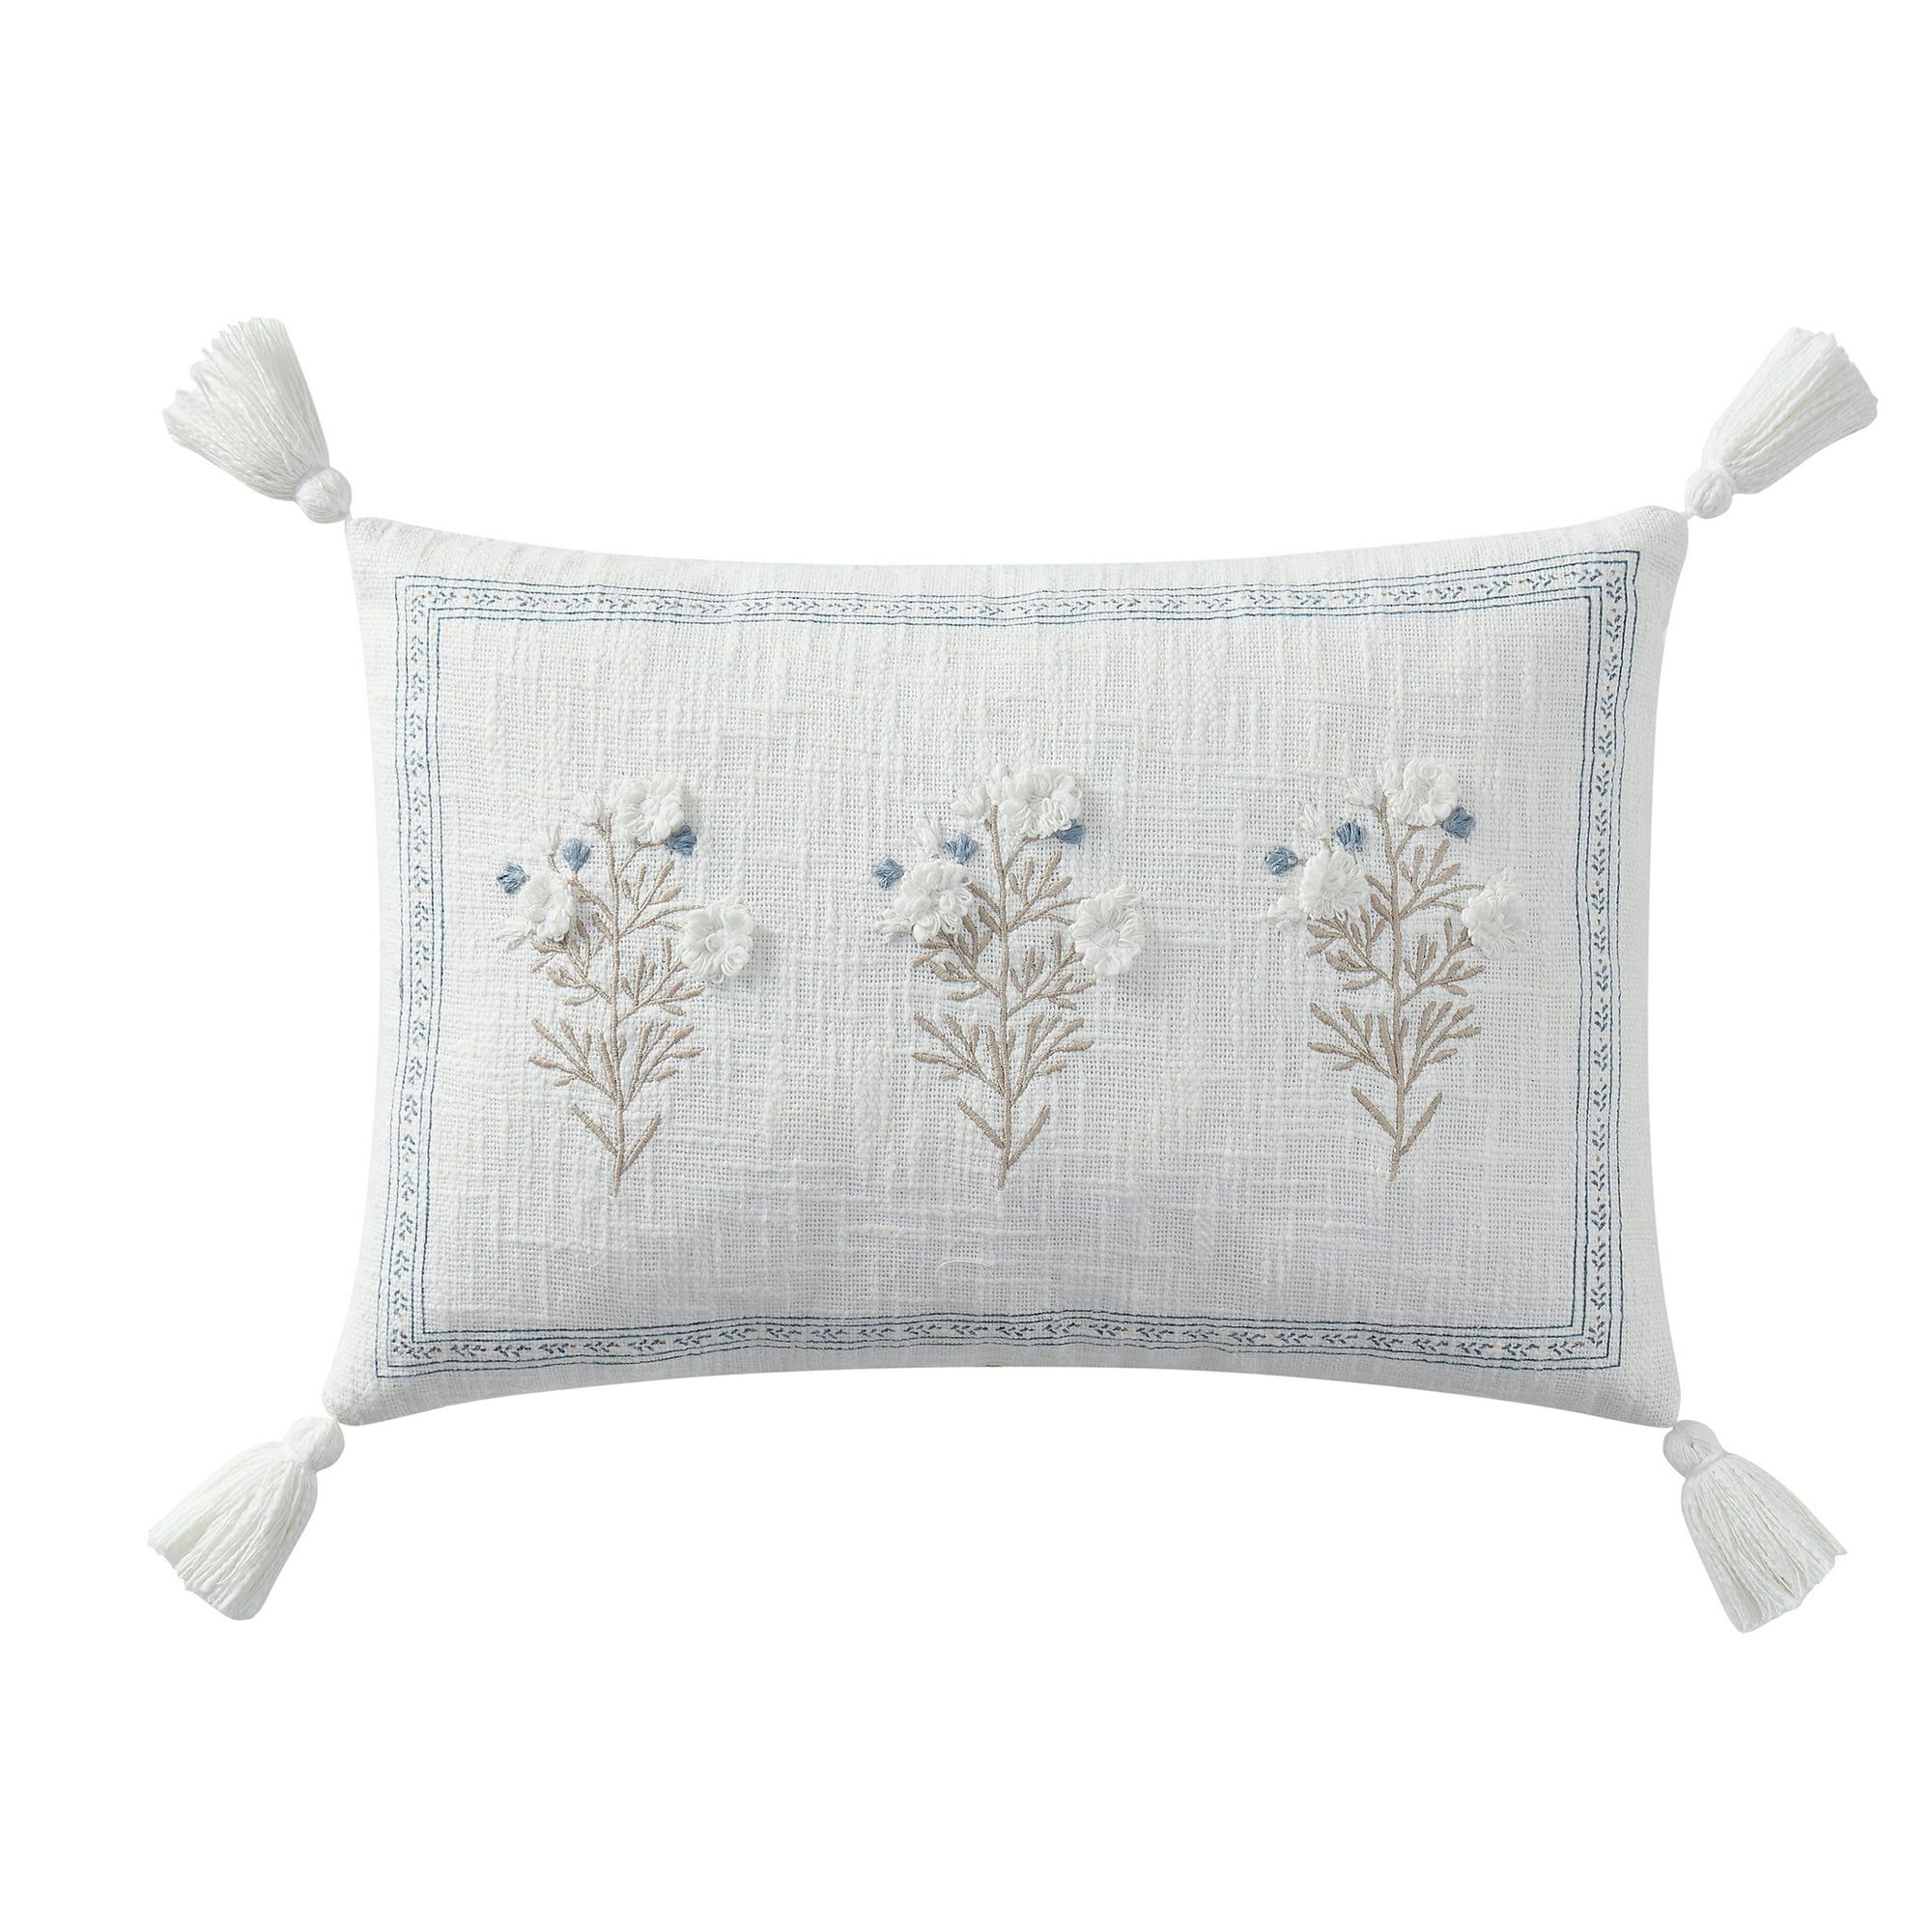 My Texas House Hailey 14" x 20" Oblong Floral Embroidered Cotton Decorative Pillow, Ivory/Blue | Walmart (US)